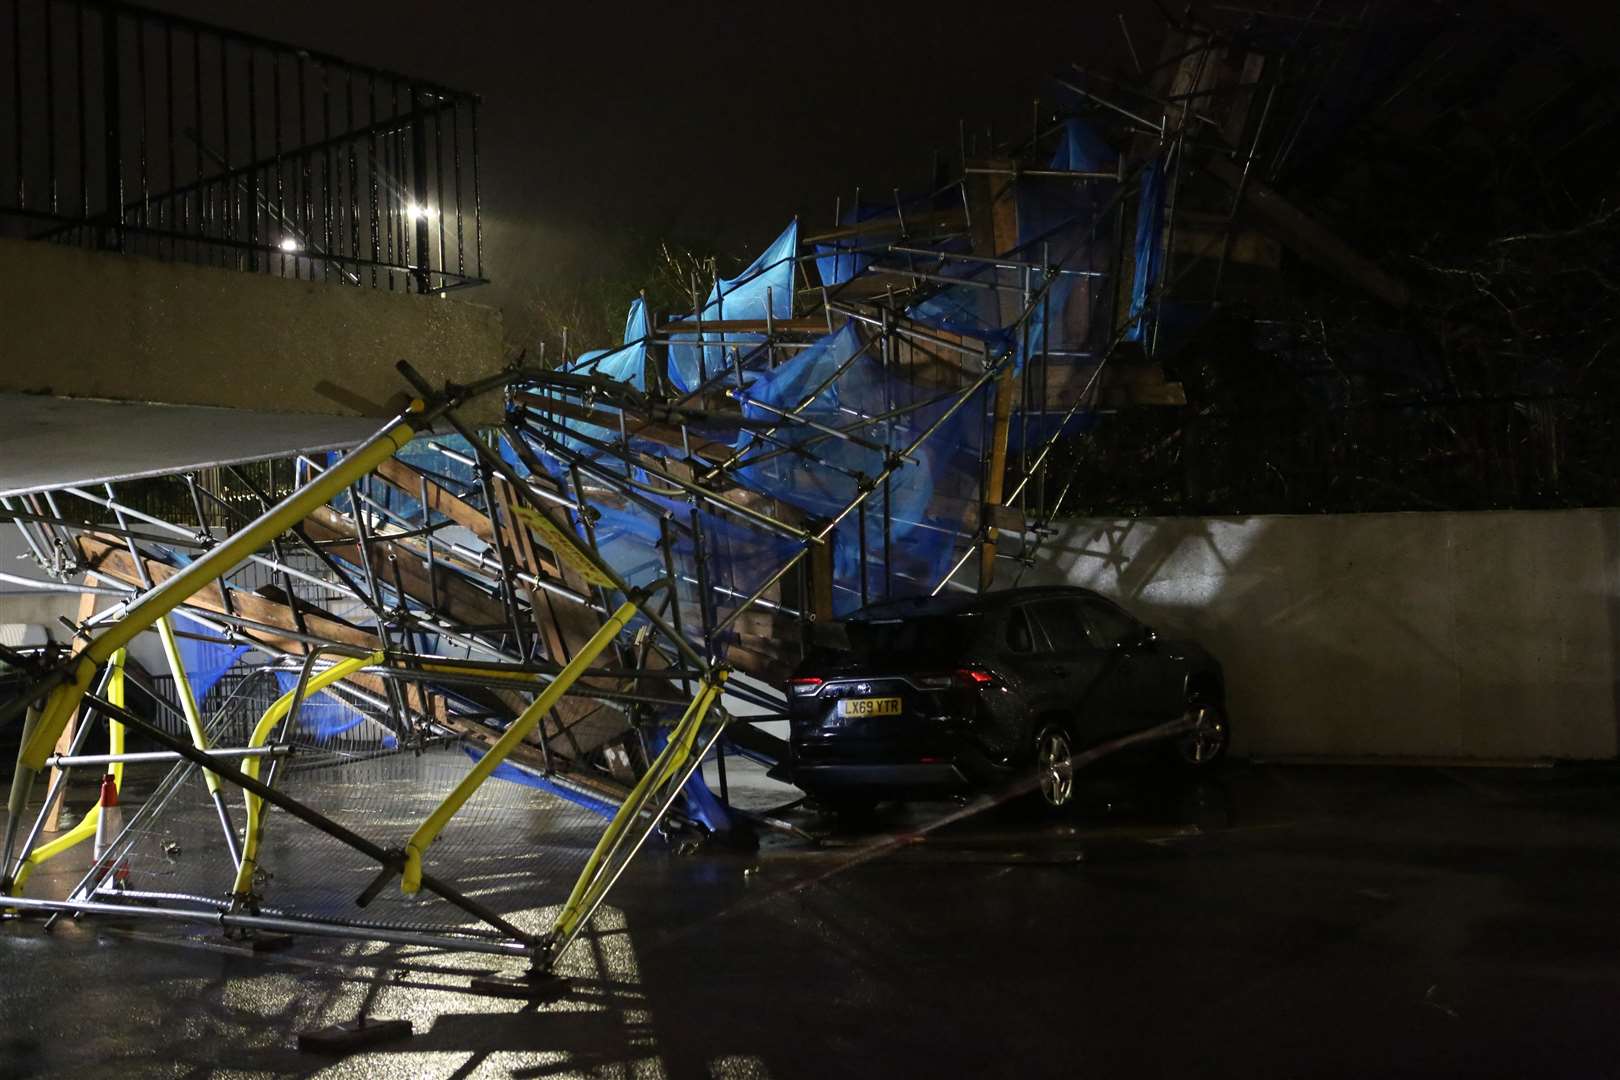 This scaffolding tower fell onto cars in Orpington during last night's storm, forcing the closure of Chelsfield Lane. Picture: UKNIP